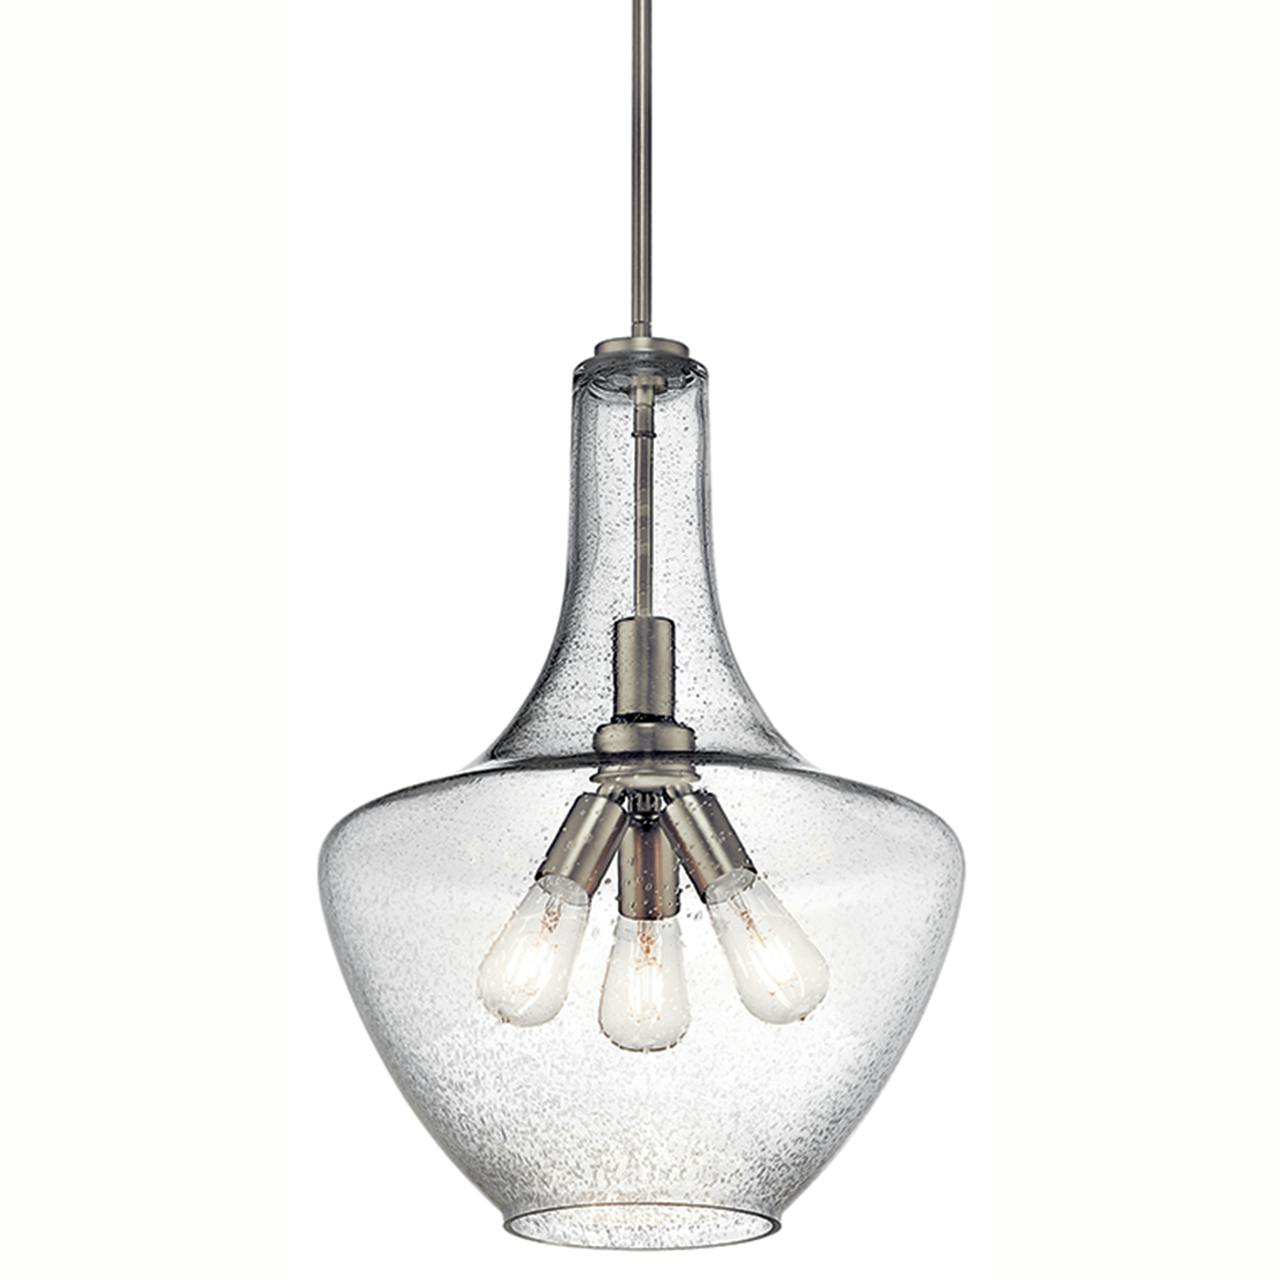 Everly 22.75" 3 Light Pendant Nickel without the canopy on a white background